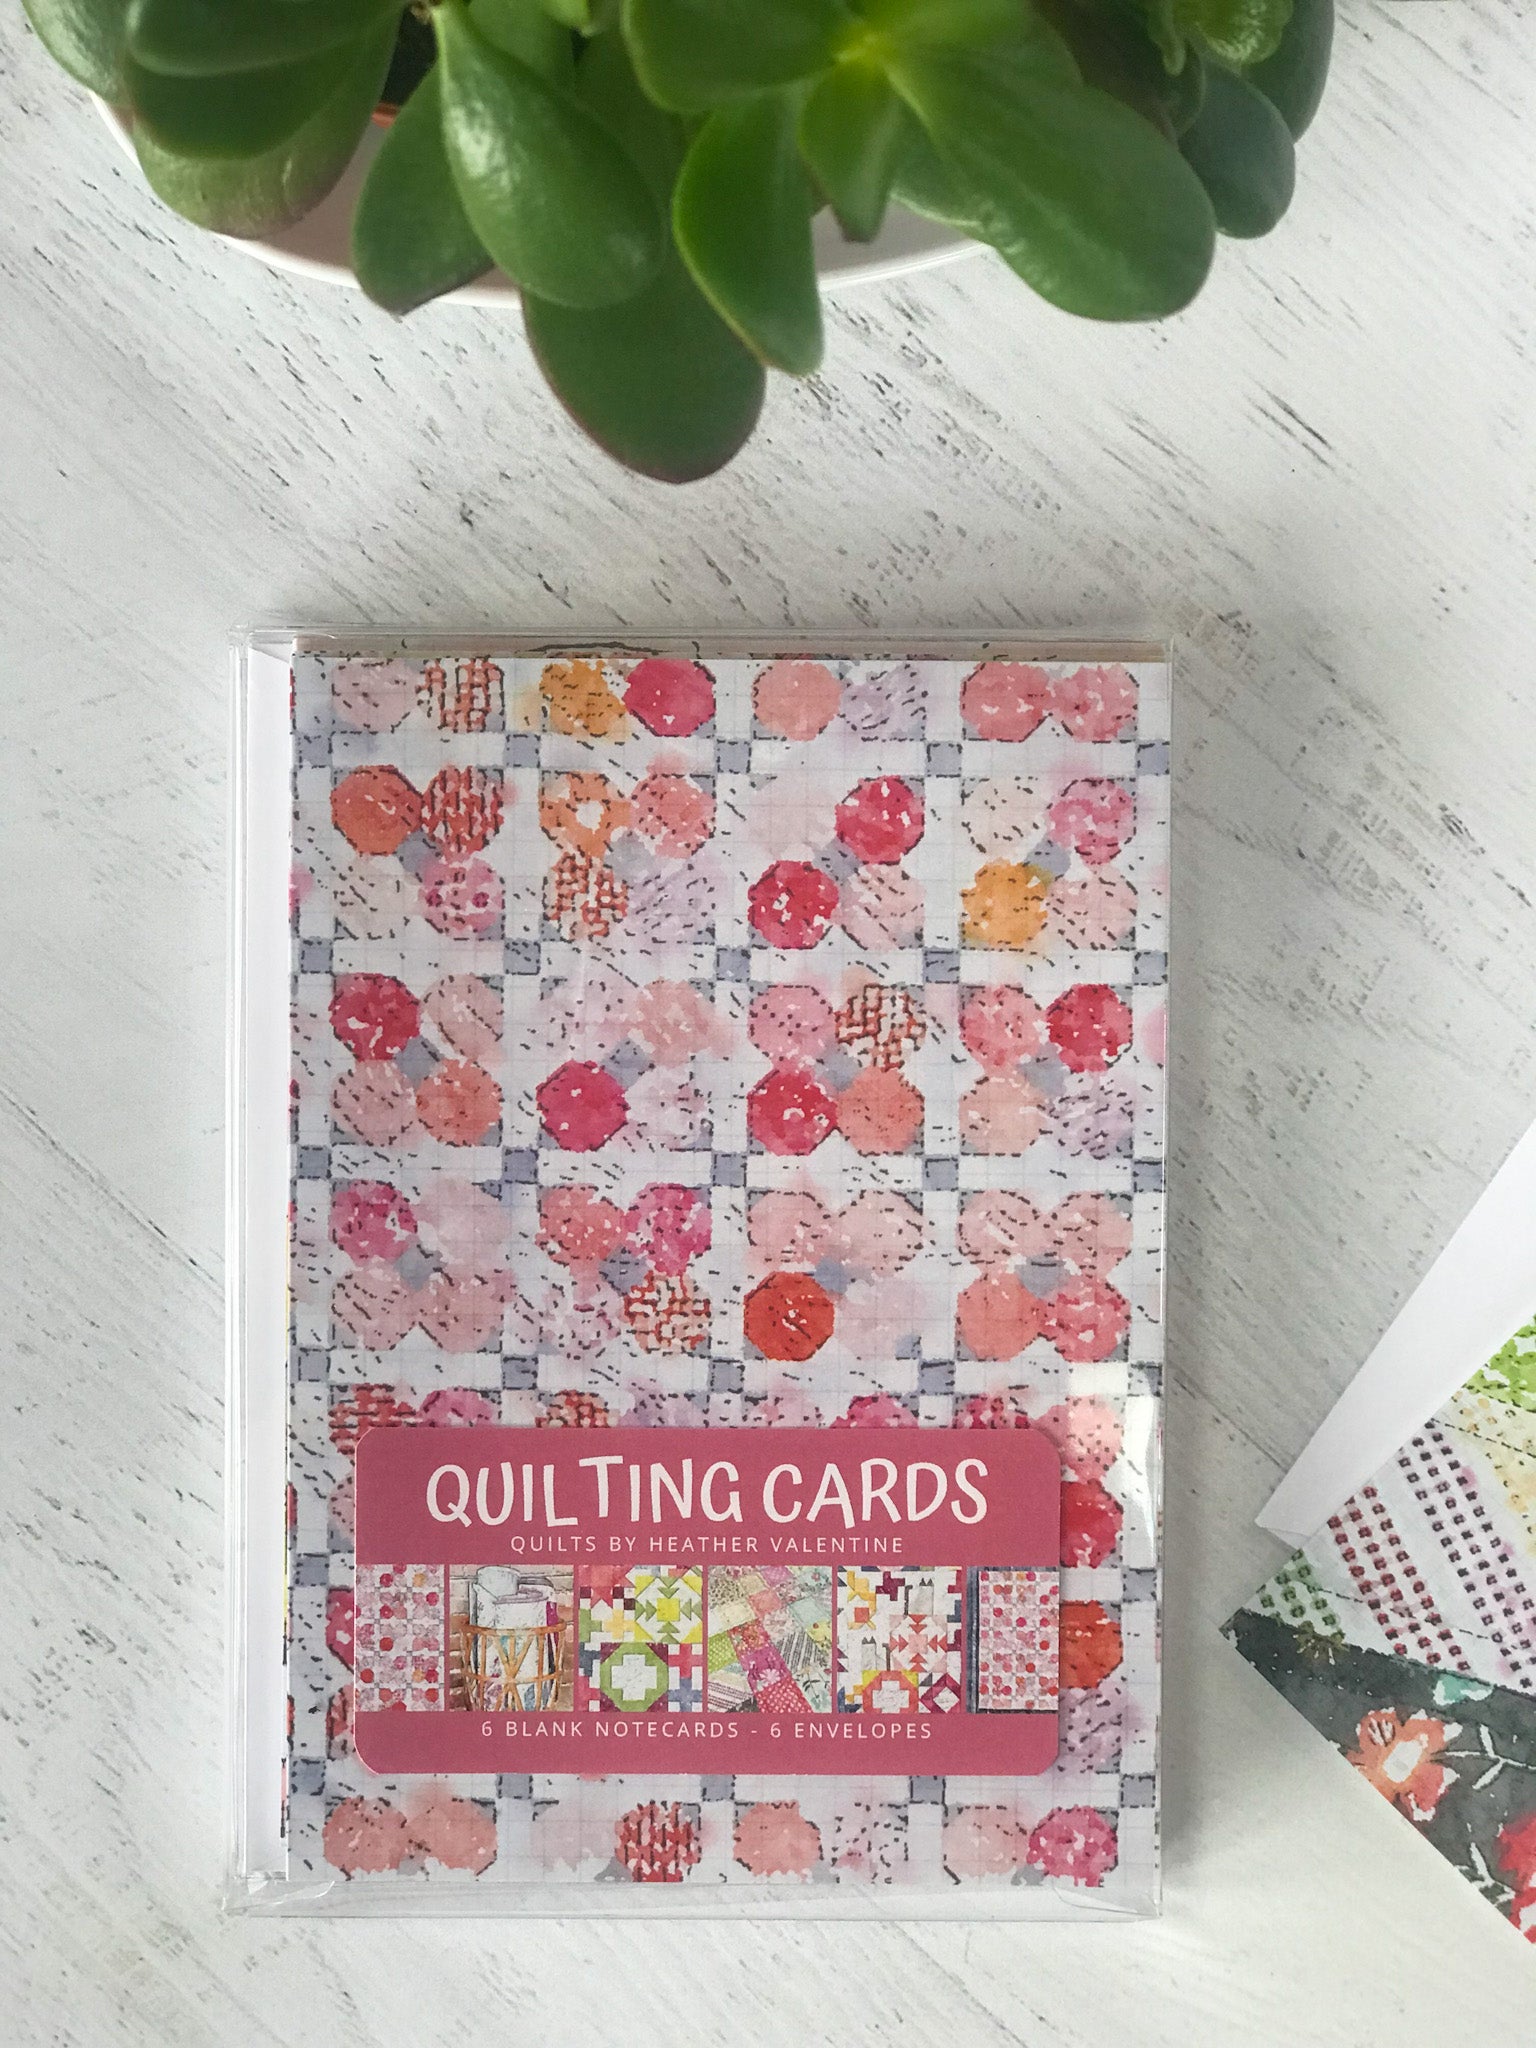 Quilting Cards Blank Note Cards TSL201 – TheSewingLoft